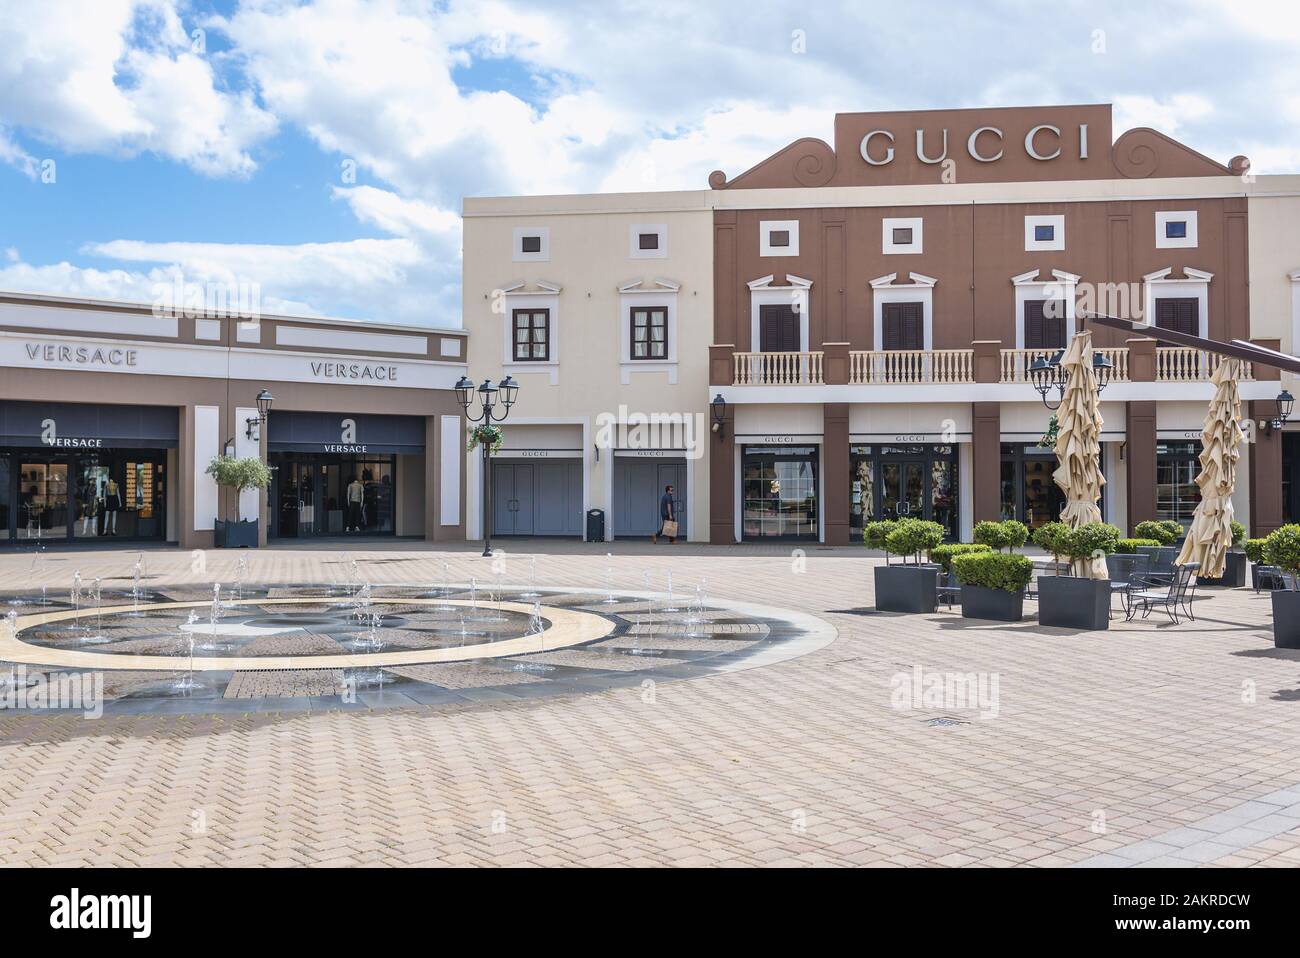 Gucci And Versace Store In Sicilia Outlet Village Located On Palermo Catania Motorway In Agira Town On Sicily Island In Italy Stock Photo Alamy